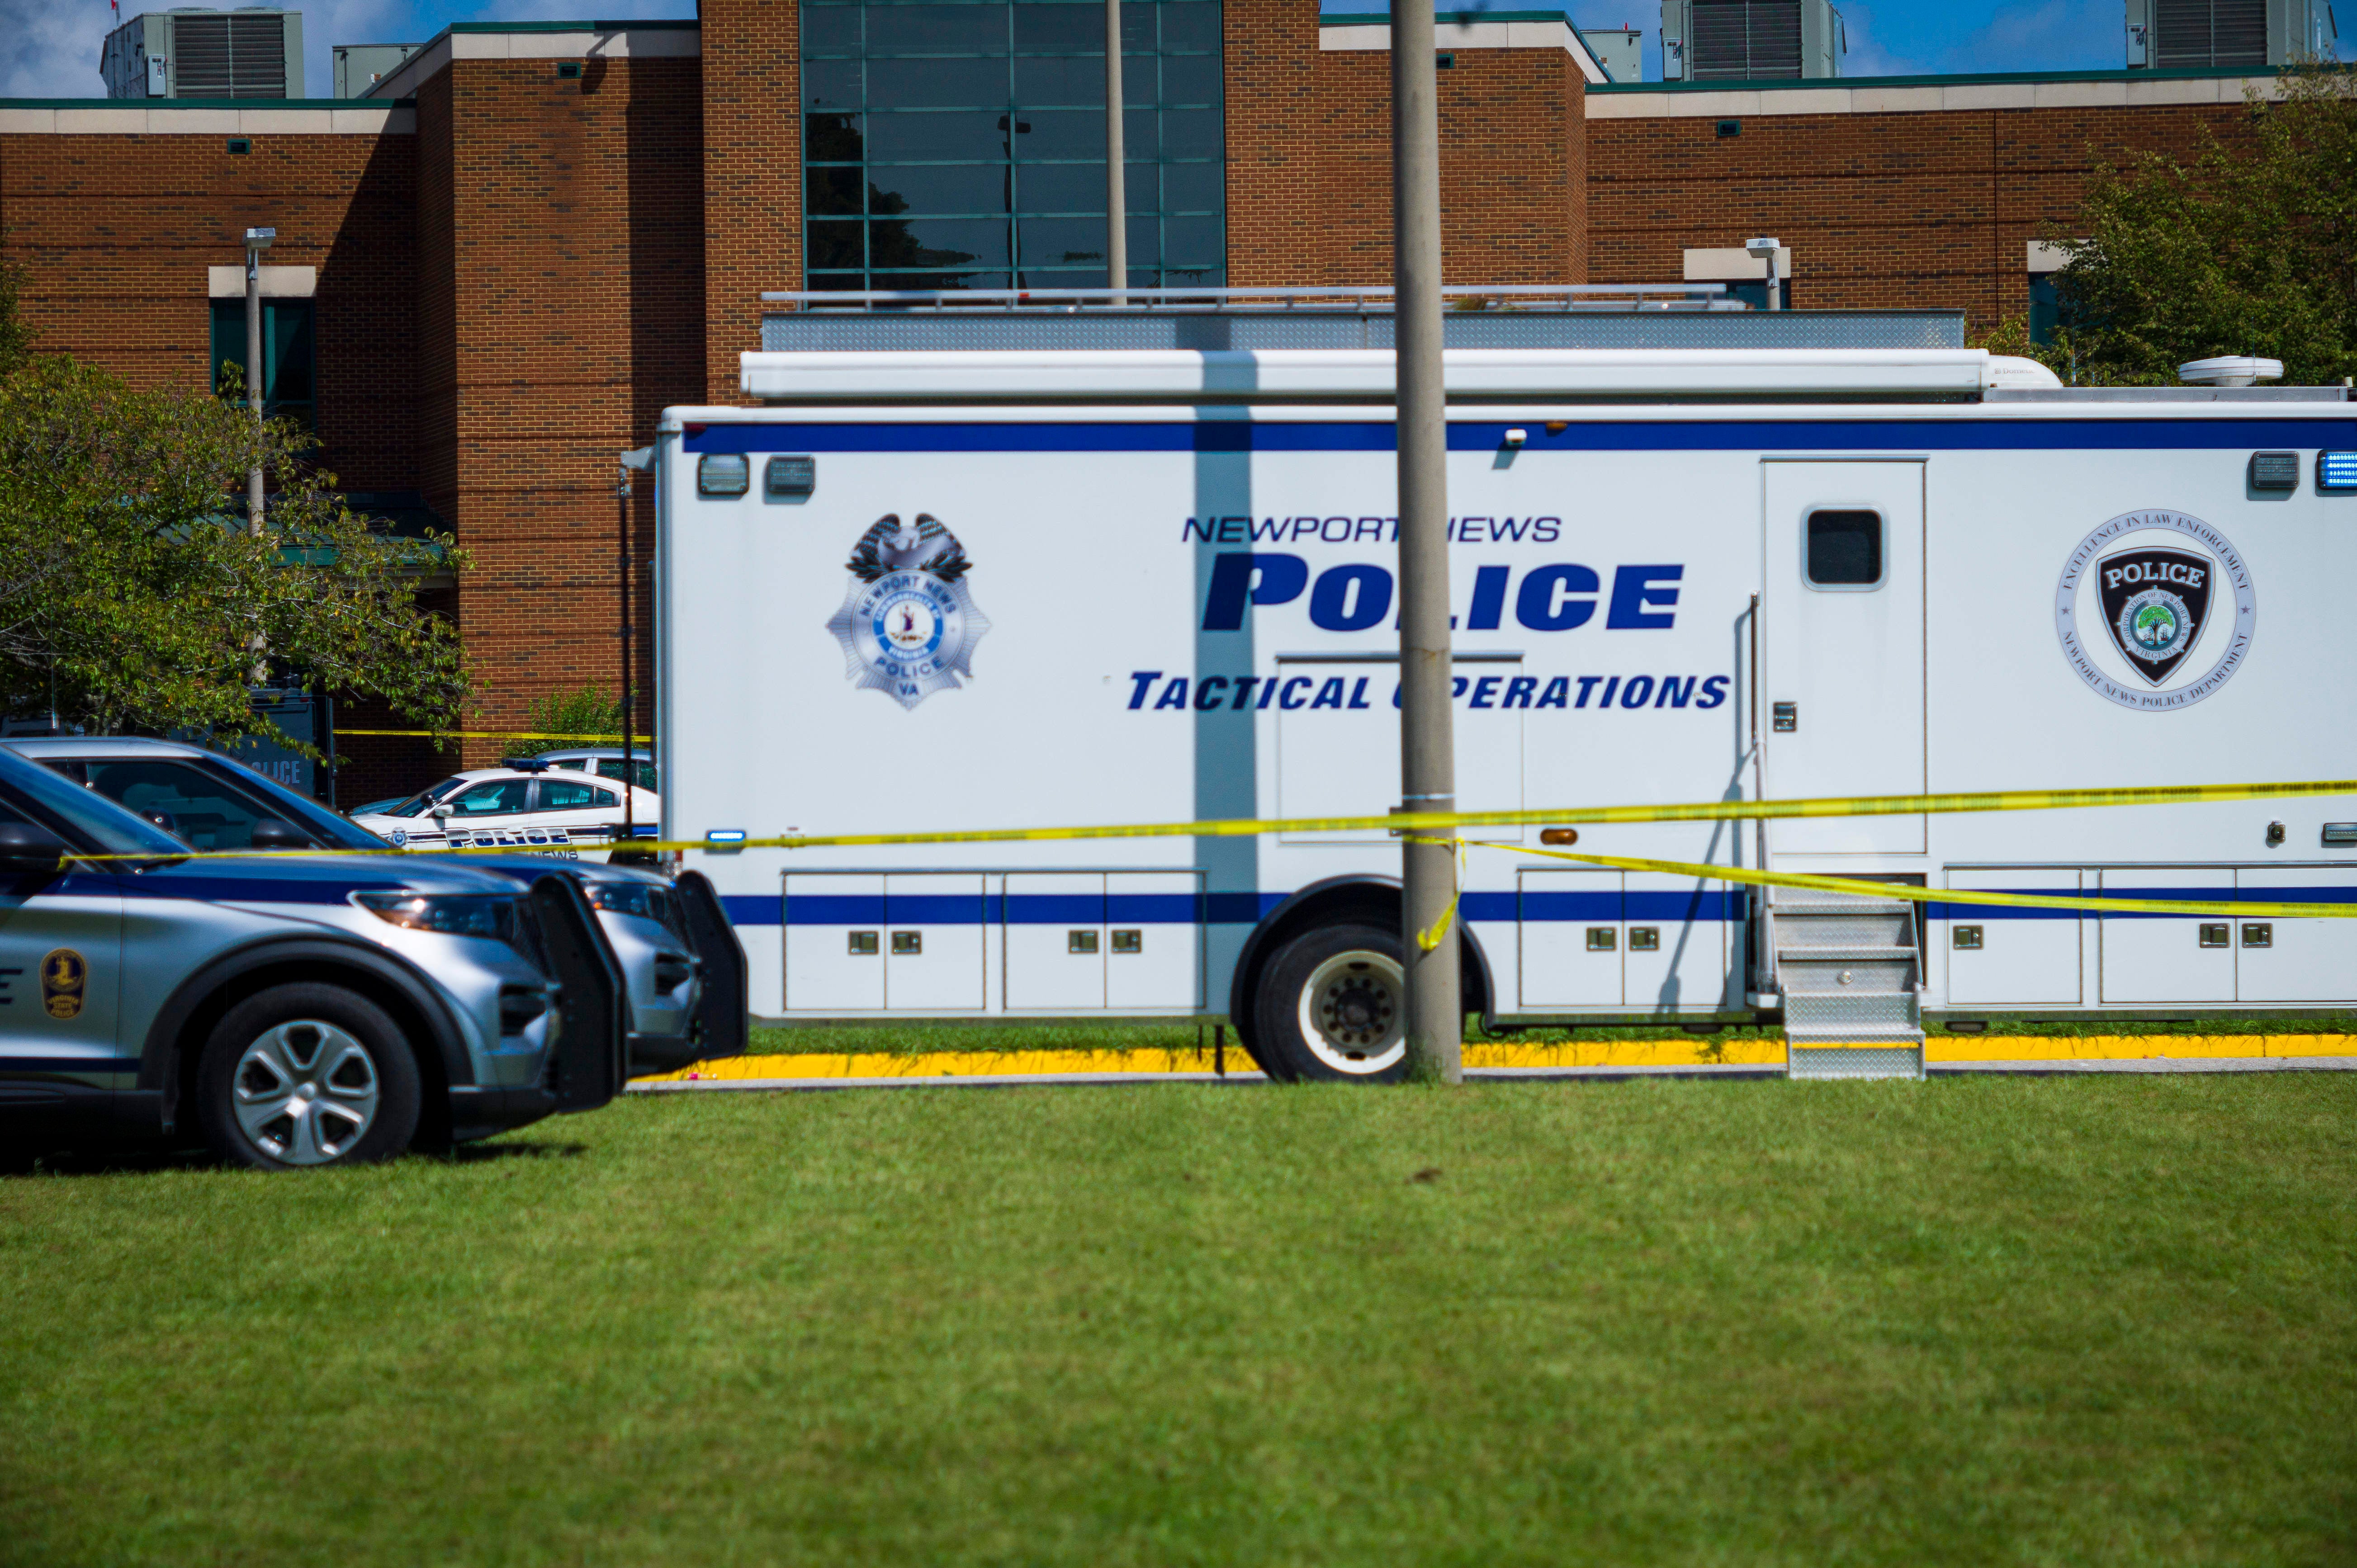 Police respond to the scene of a shooting at Heritage High School in Newport News, Va.